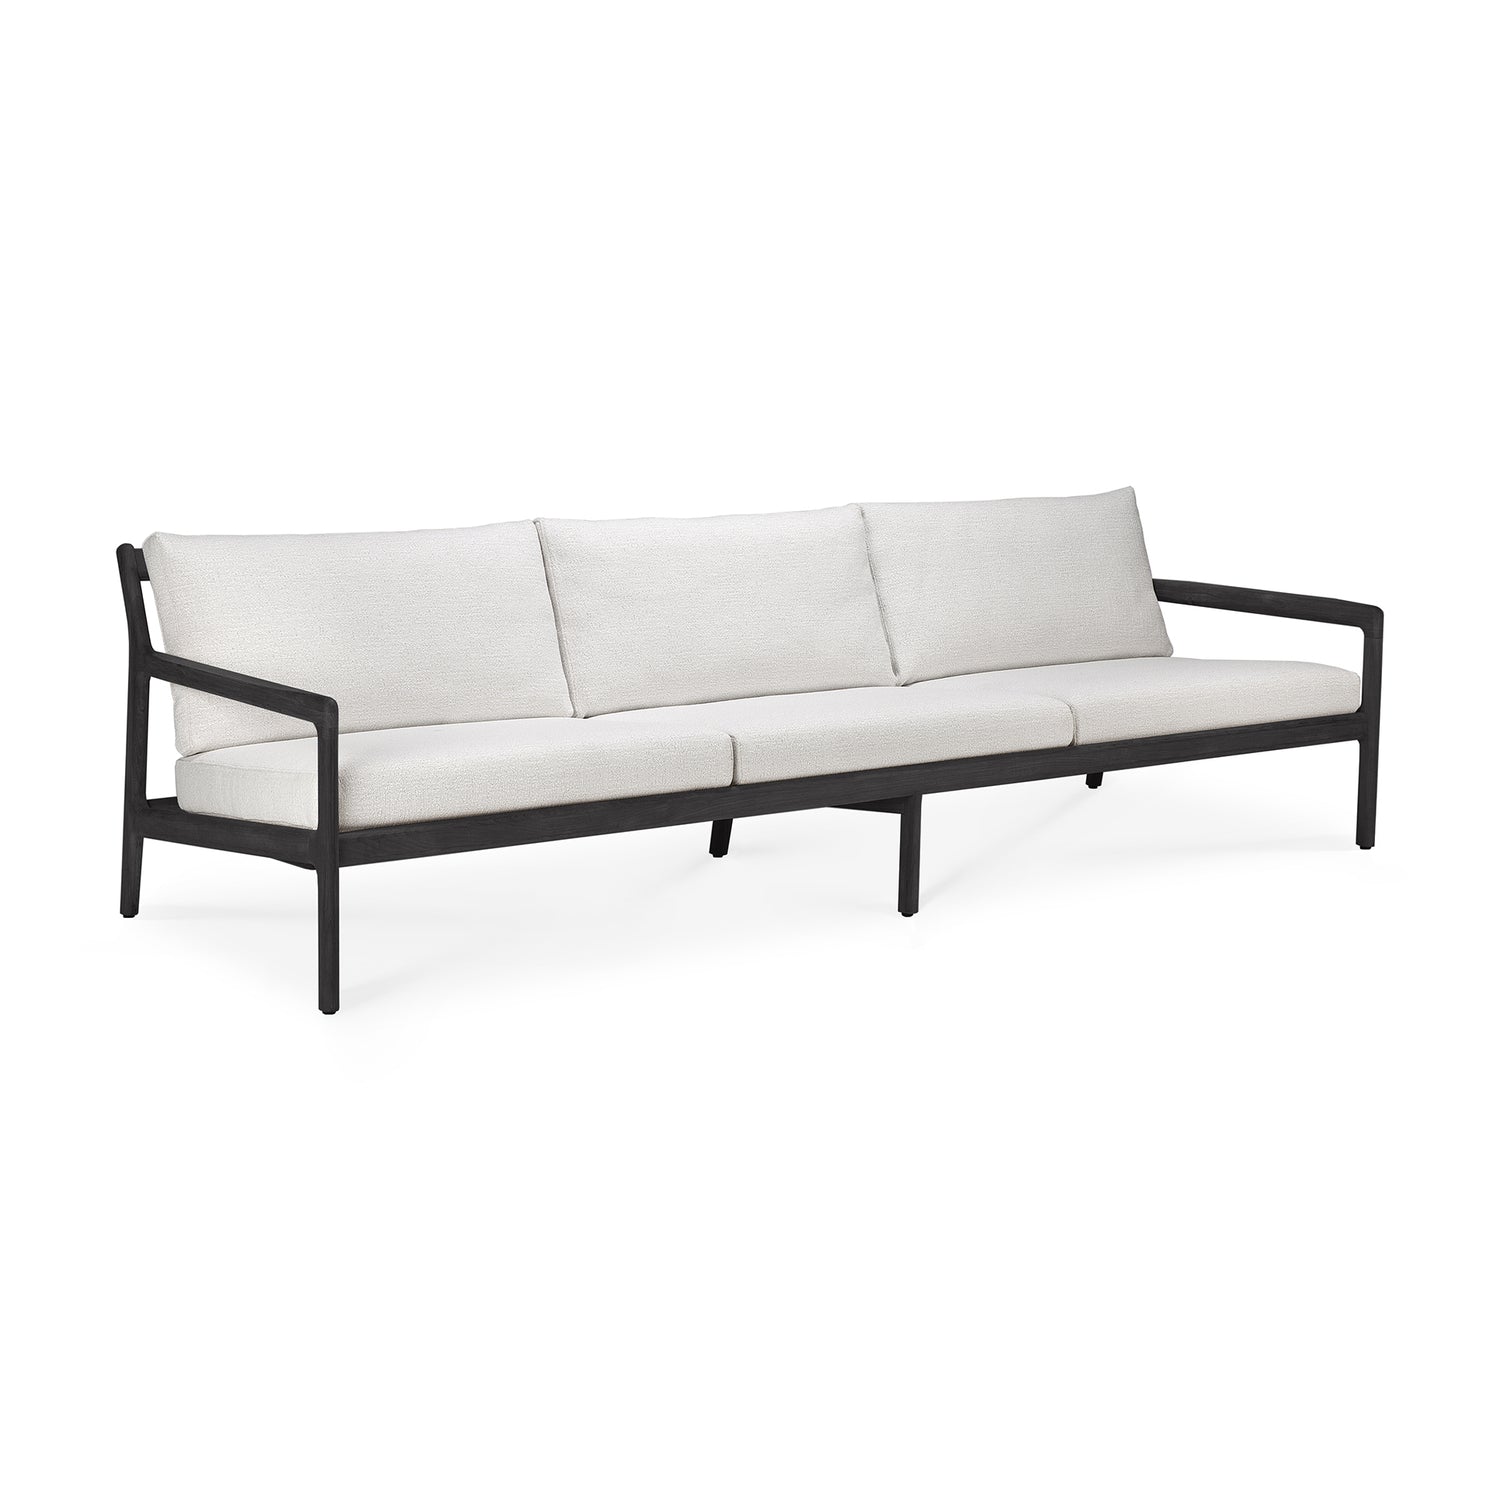 Jack Solid Black Teak Outdoor 3 Seater Sofa, Off White Fabric